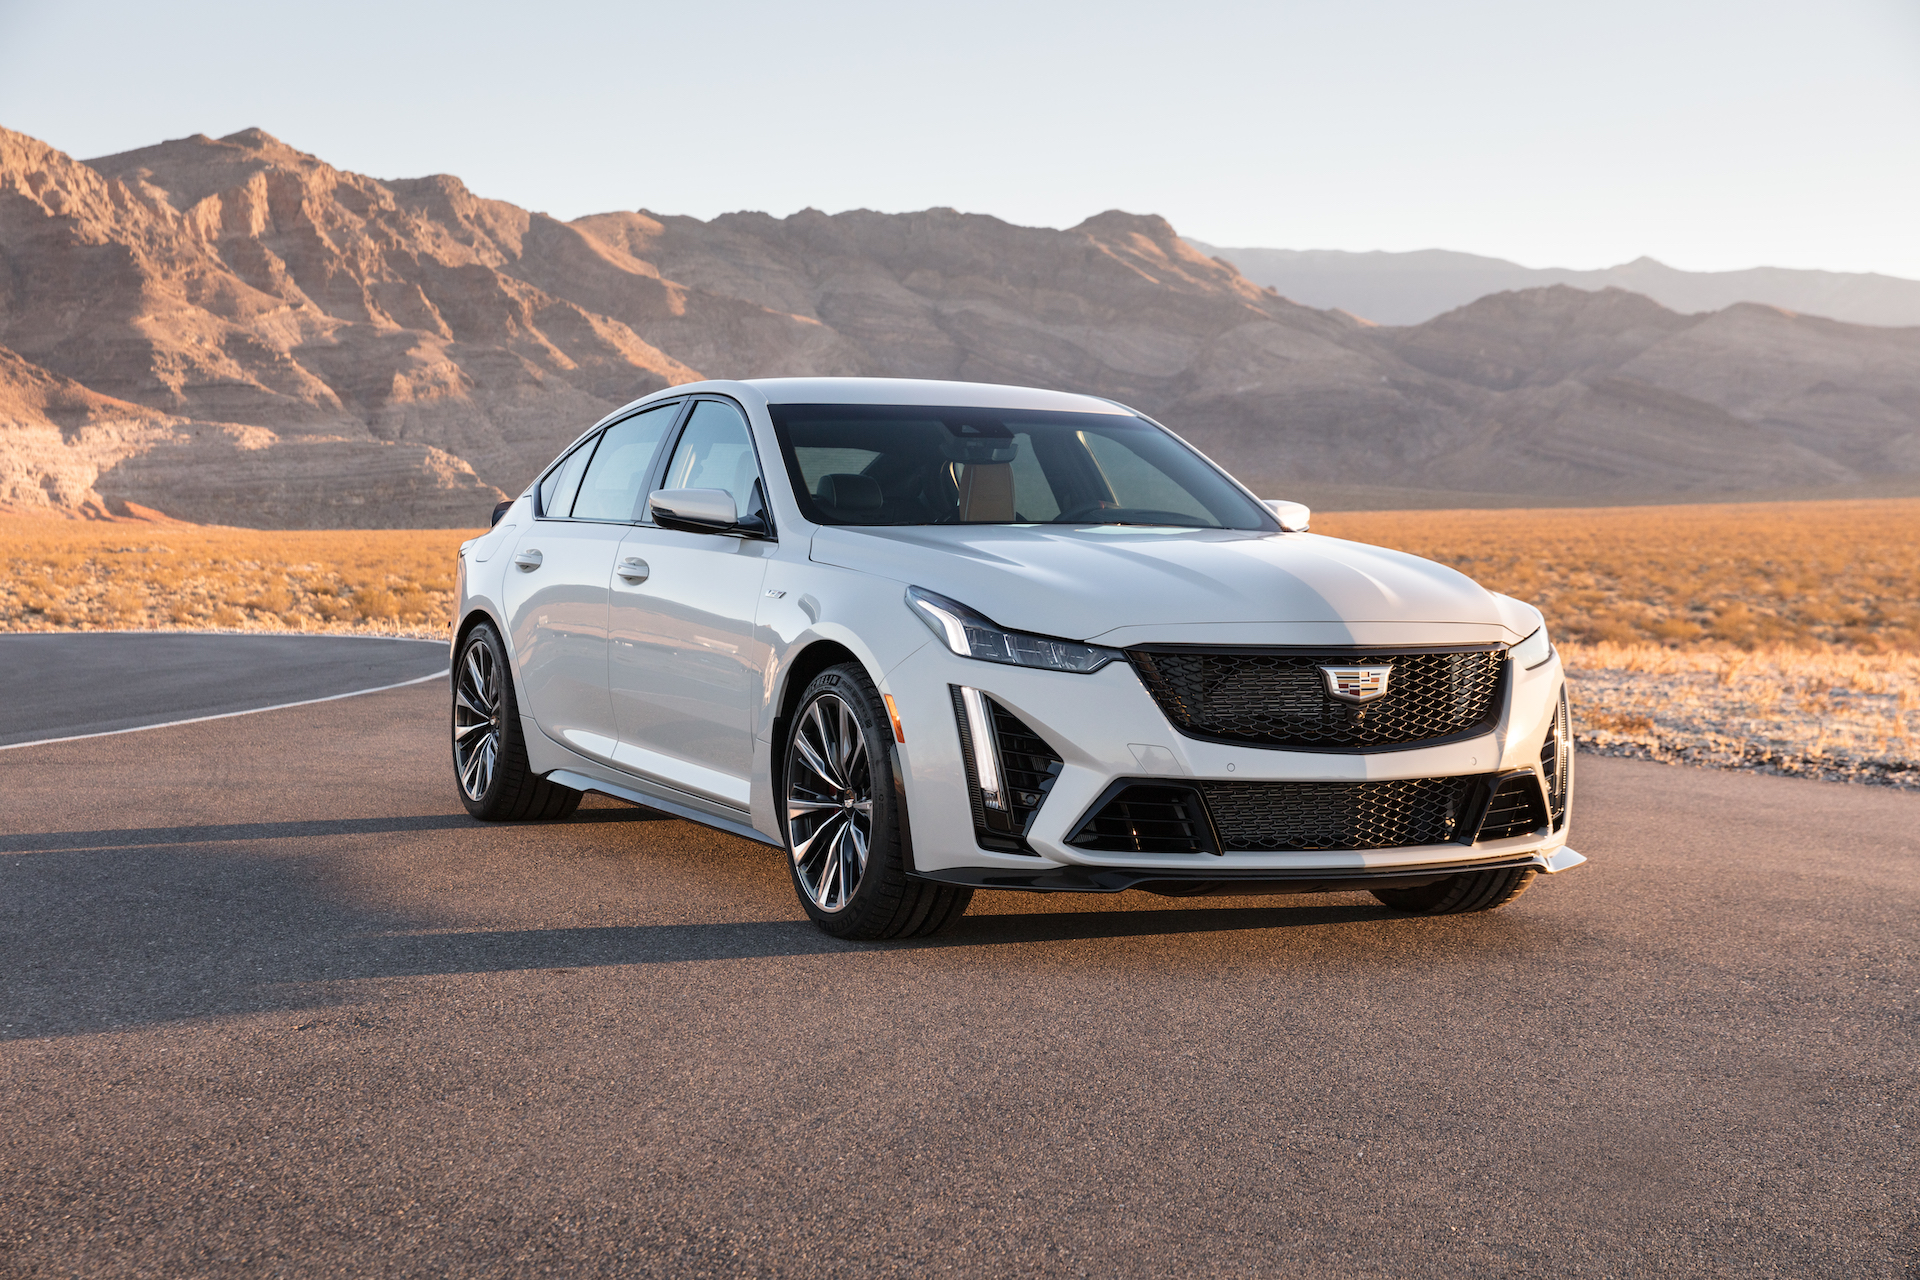 2022 Cadillac CT5-V Blackwing, 2022 Ford Ranger Raptor, 2022 Nissan Frontier: This Week’s Prime Pictures Auto Recent